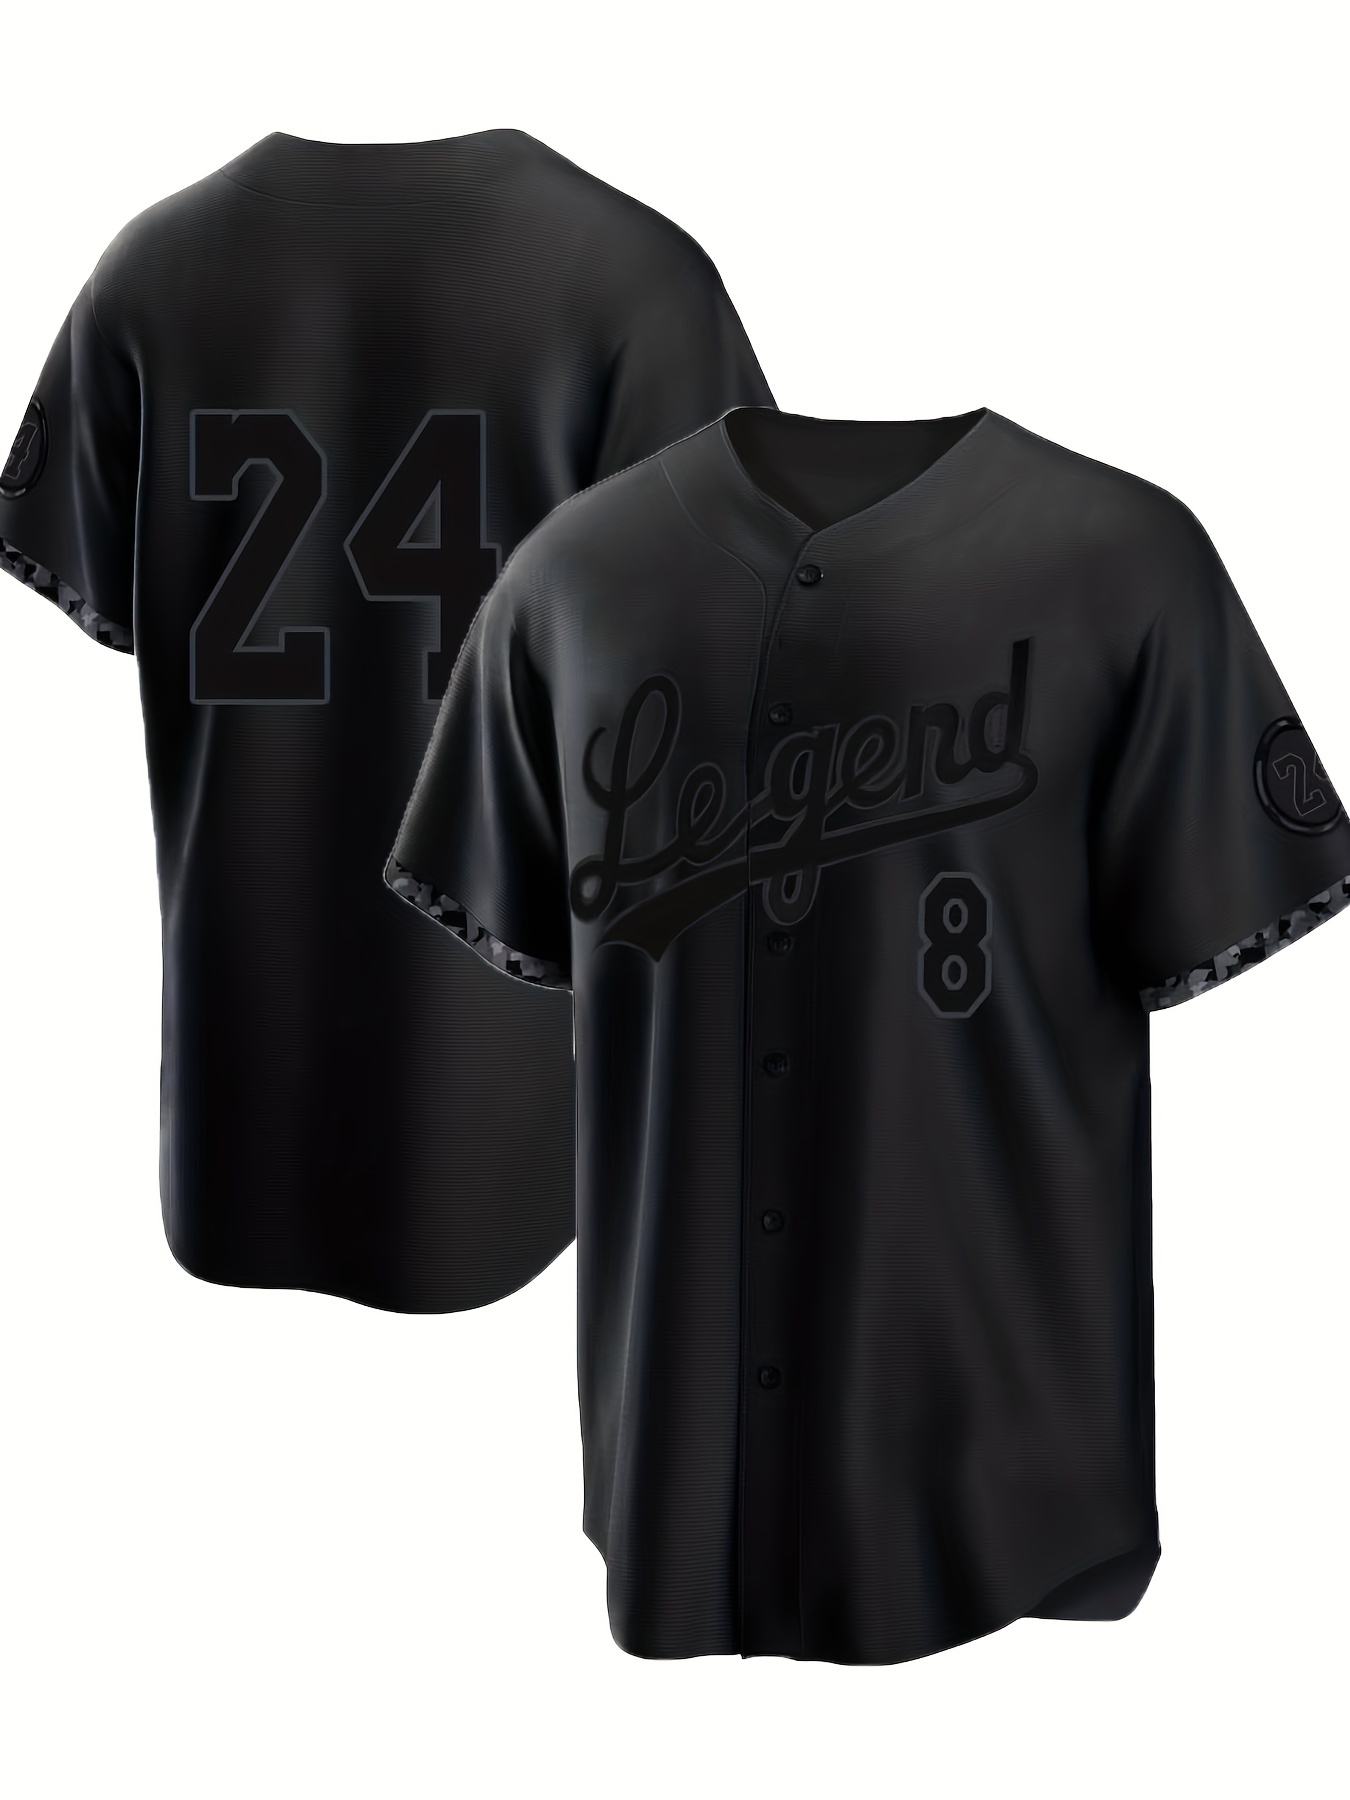 Men's Classic Design #42 Baseball Jersey, Retro Baseball Shirt, Slightly Stretch Breathable Embroidery Button Up Sports Uniform for Training